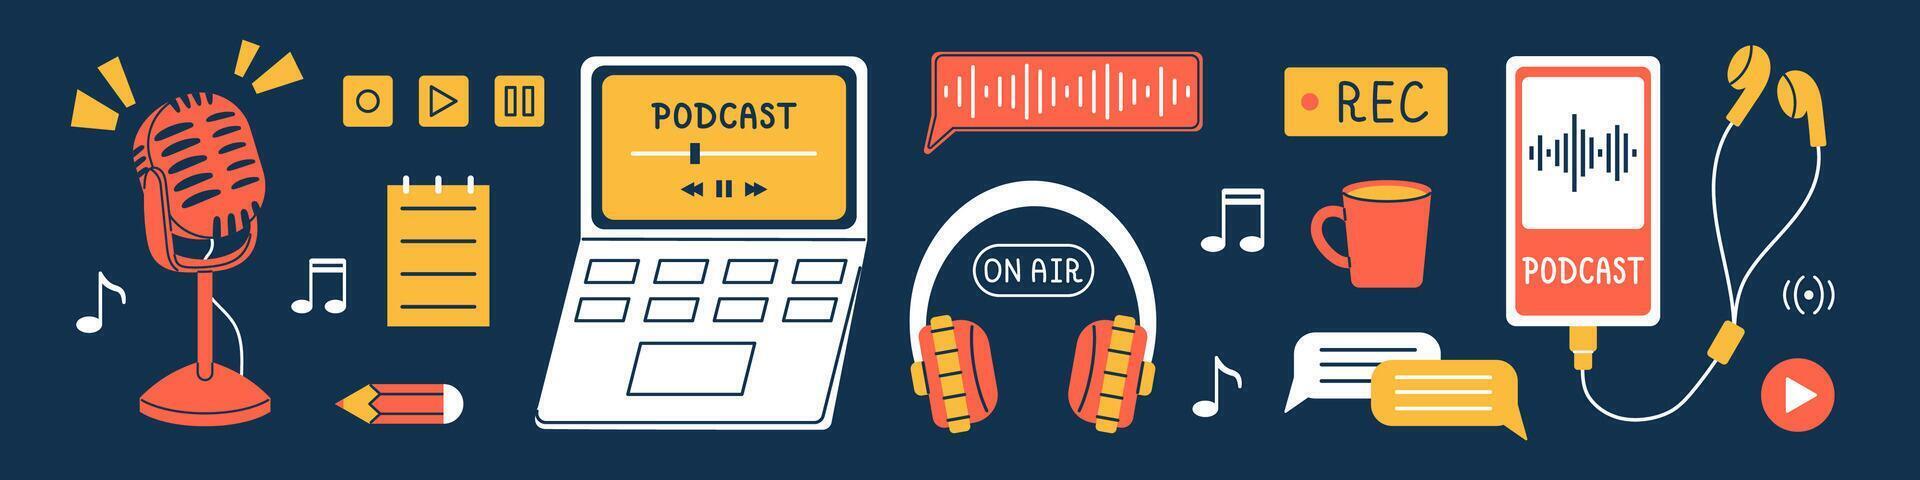 set of different podcast elements. Collection of earphones, microphone, headphones, laptop, phone and other technology for broadcast. Podcast recording and listening, broadcasting, radio. vector